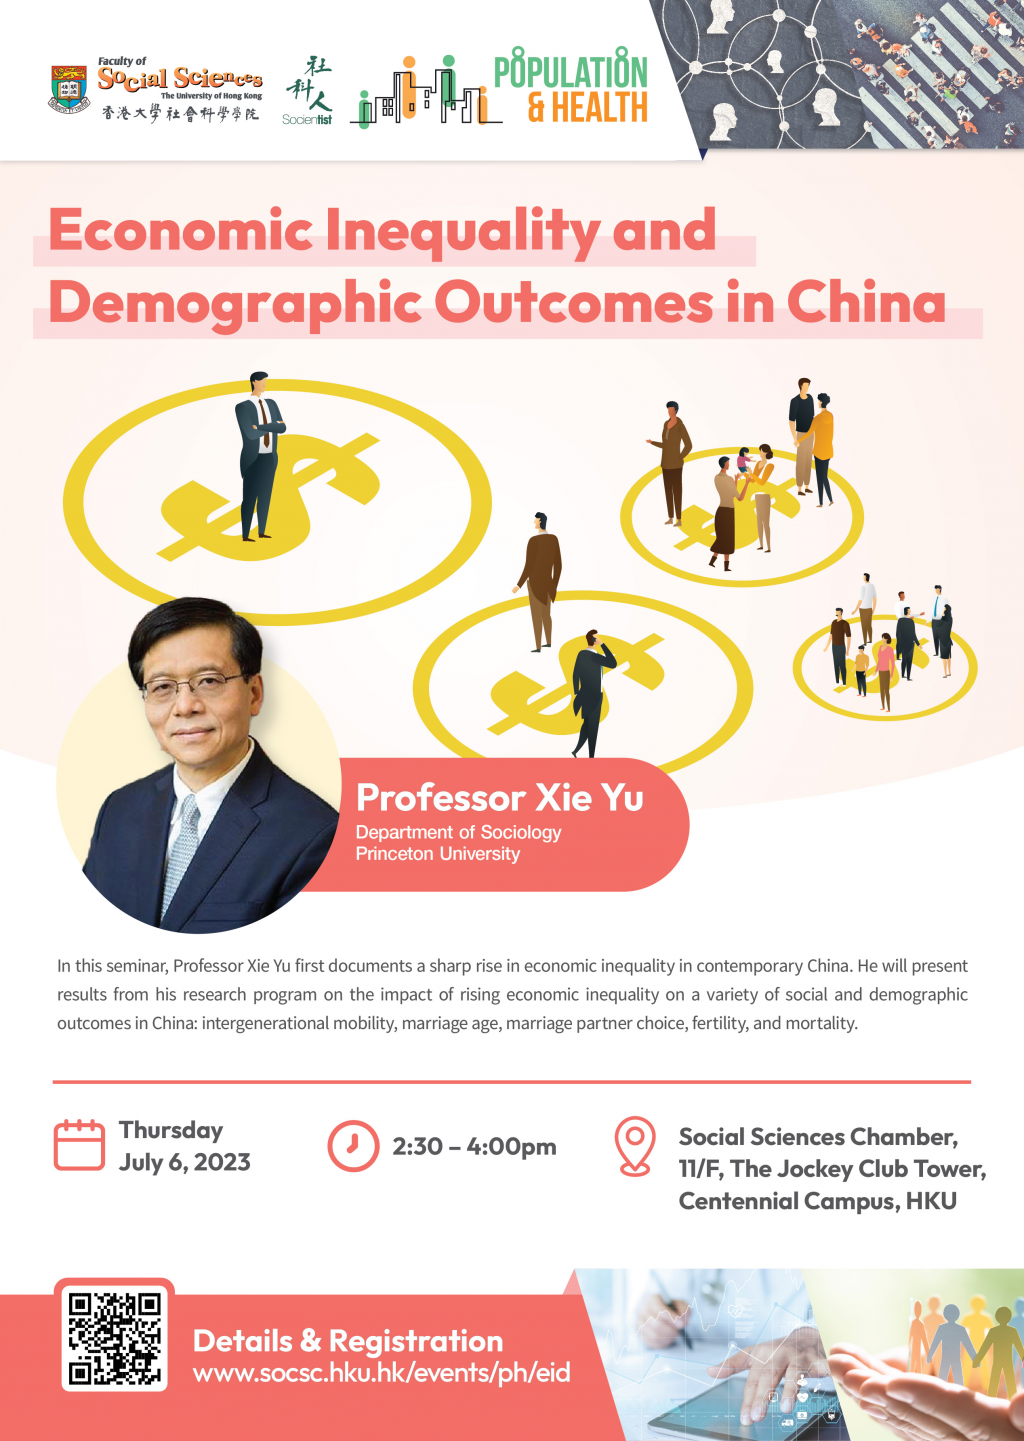 Economic Inequality and Demographic Outcomes in China